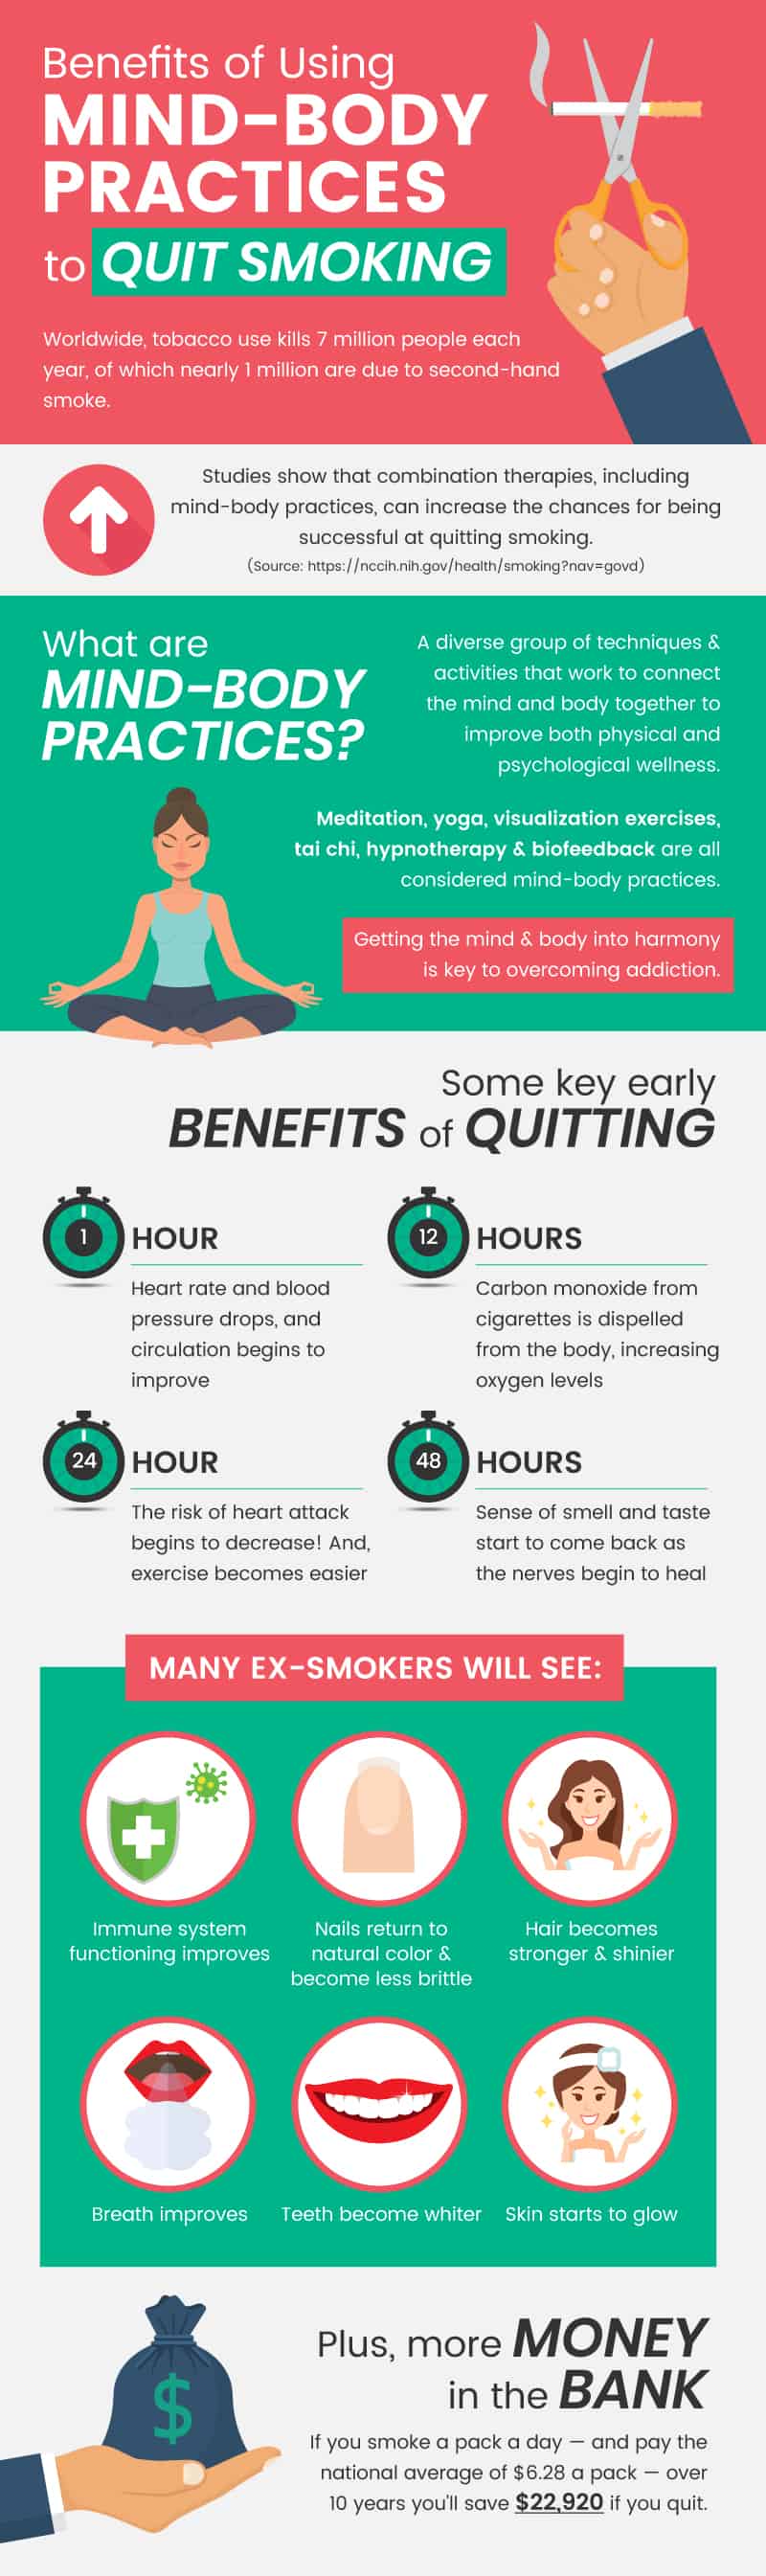 Quitting smoking benefits - Dr. Axe